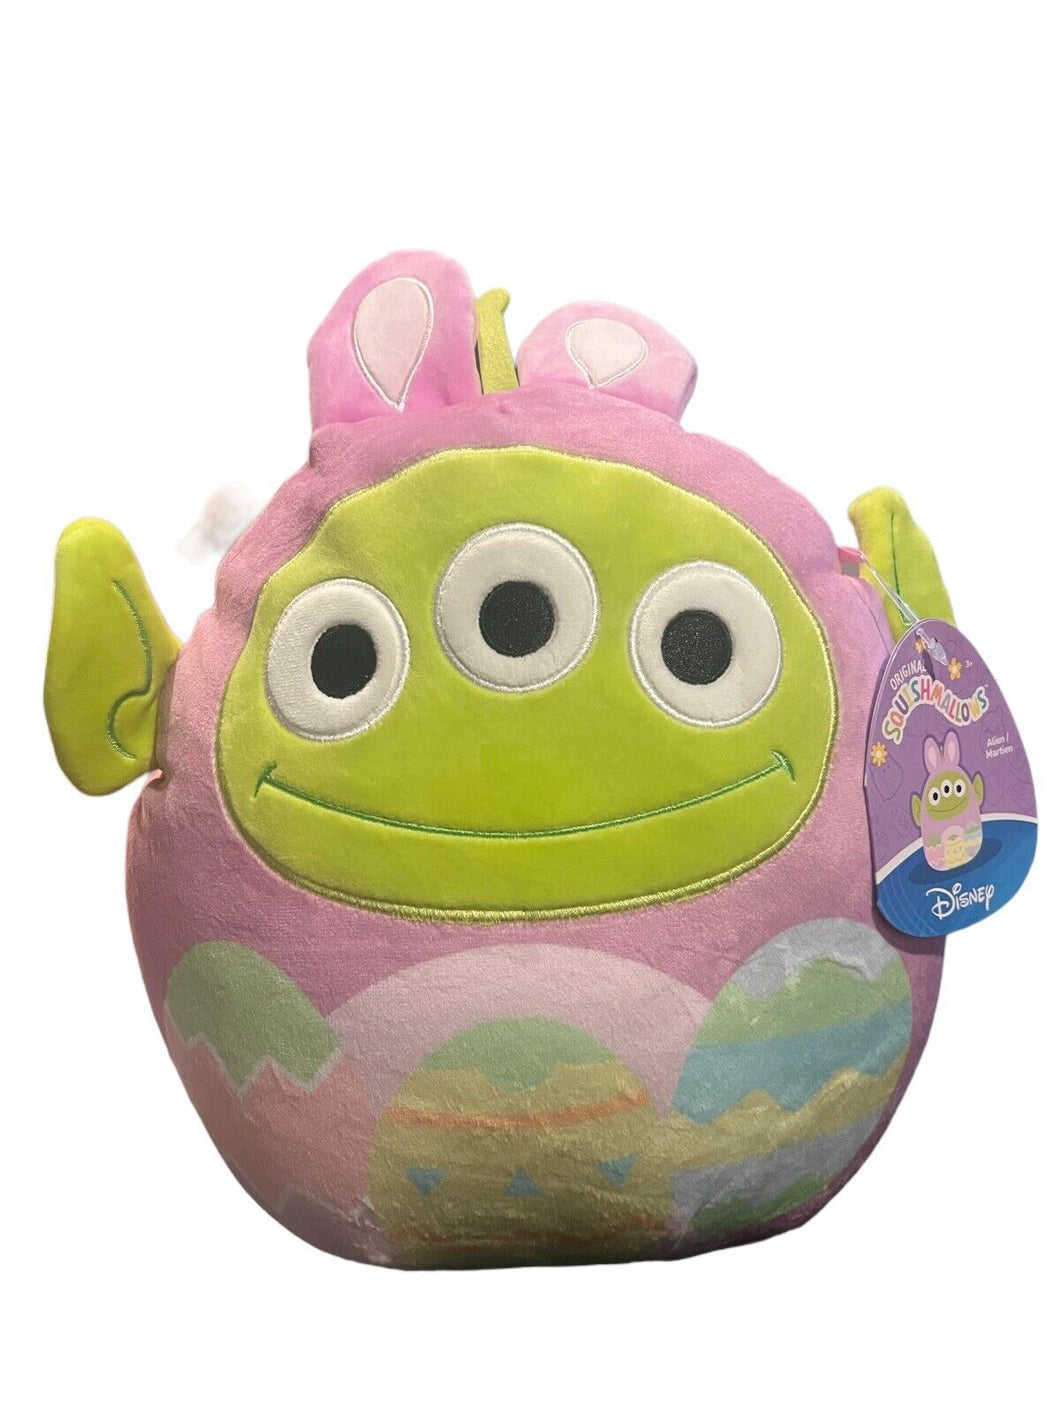 Squishmallows Alien from Toy Story Wearing Bunny Costume 10